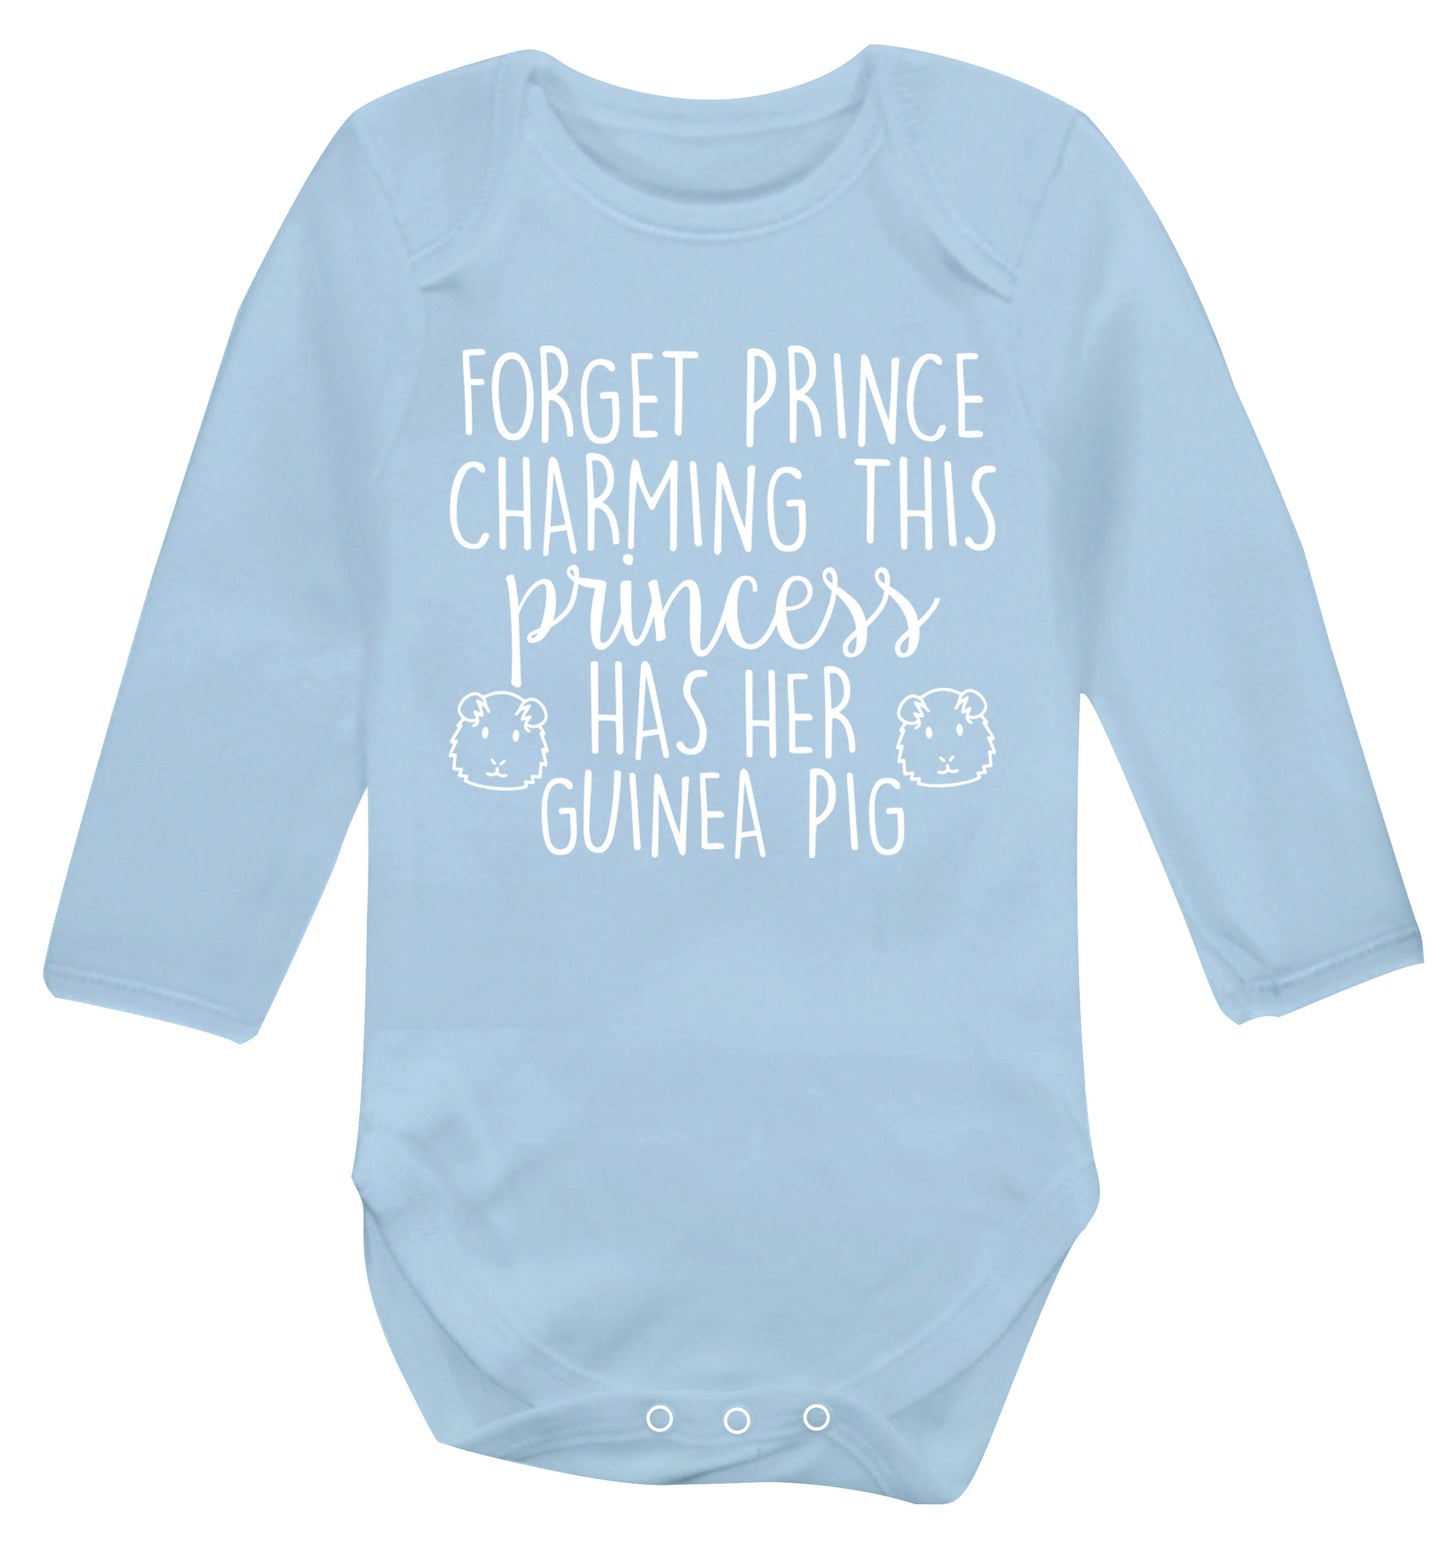 Forget prince charming, I have my guinea pig Baby Vest long sleeved pale blue 6-12 months